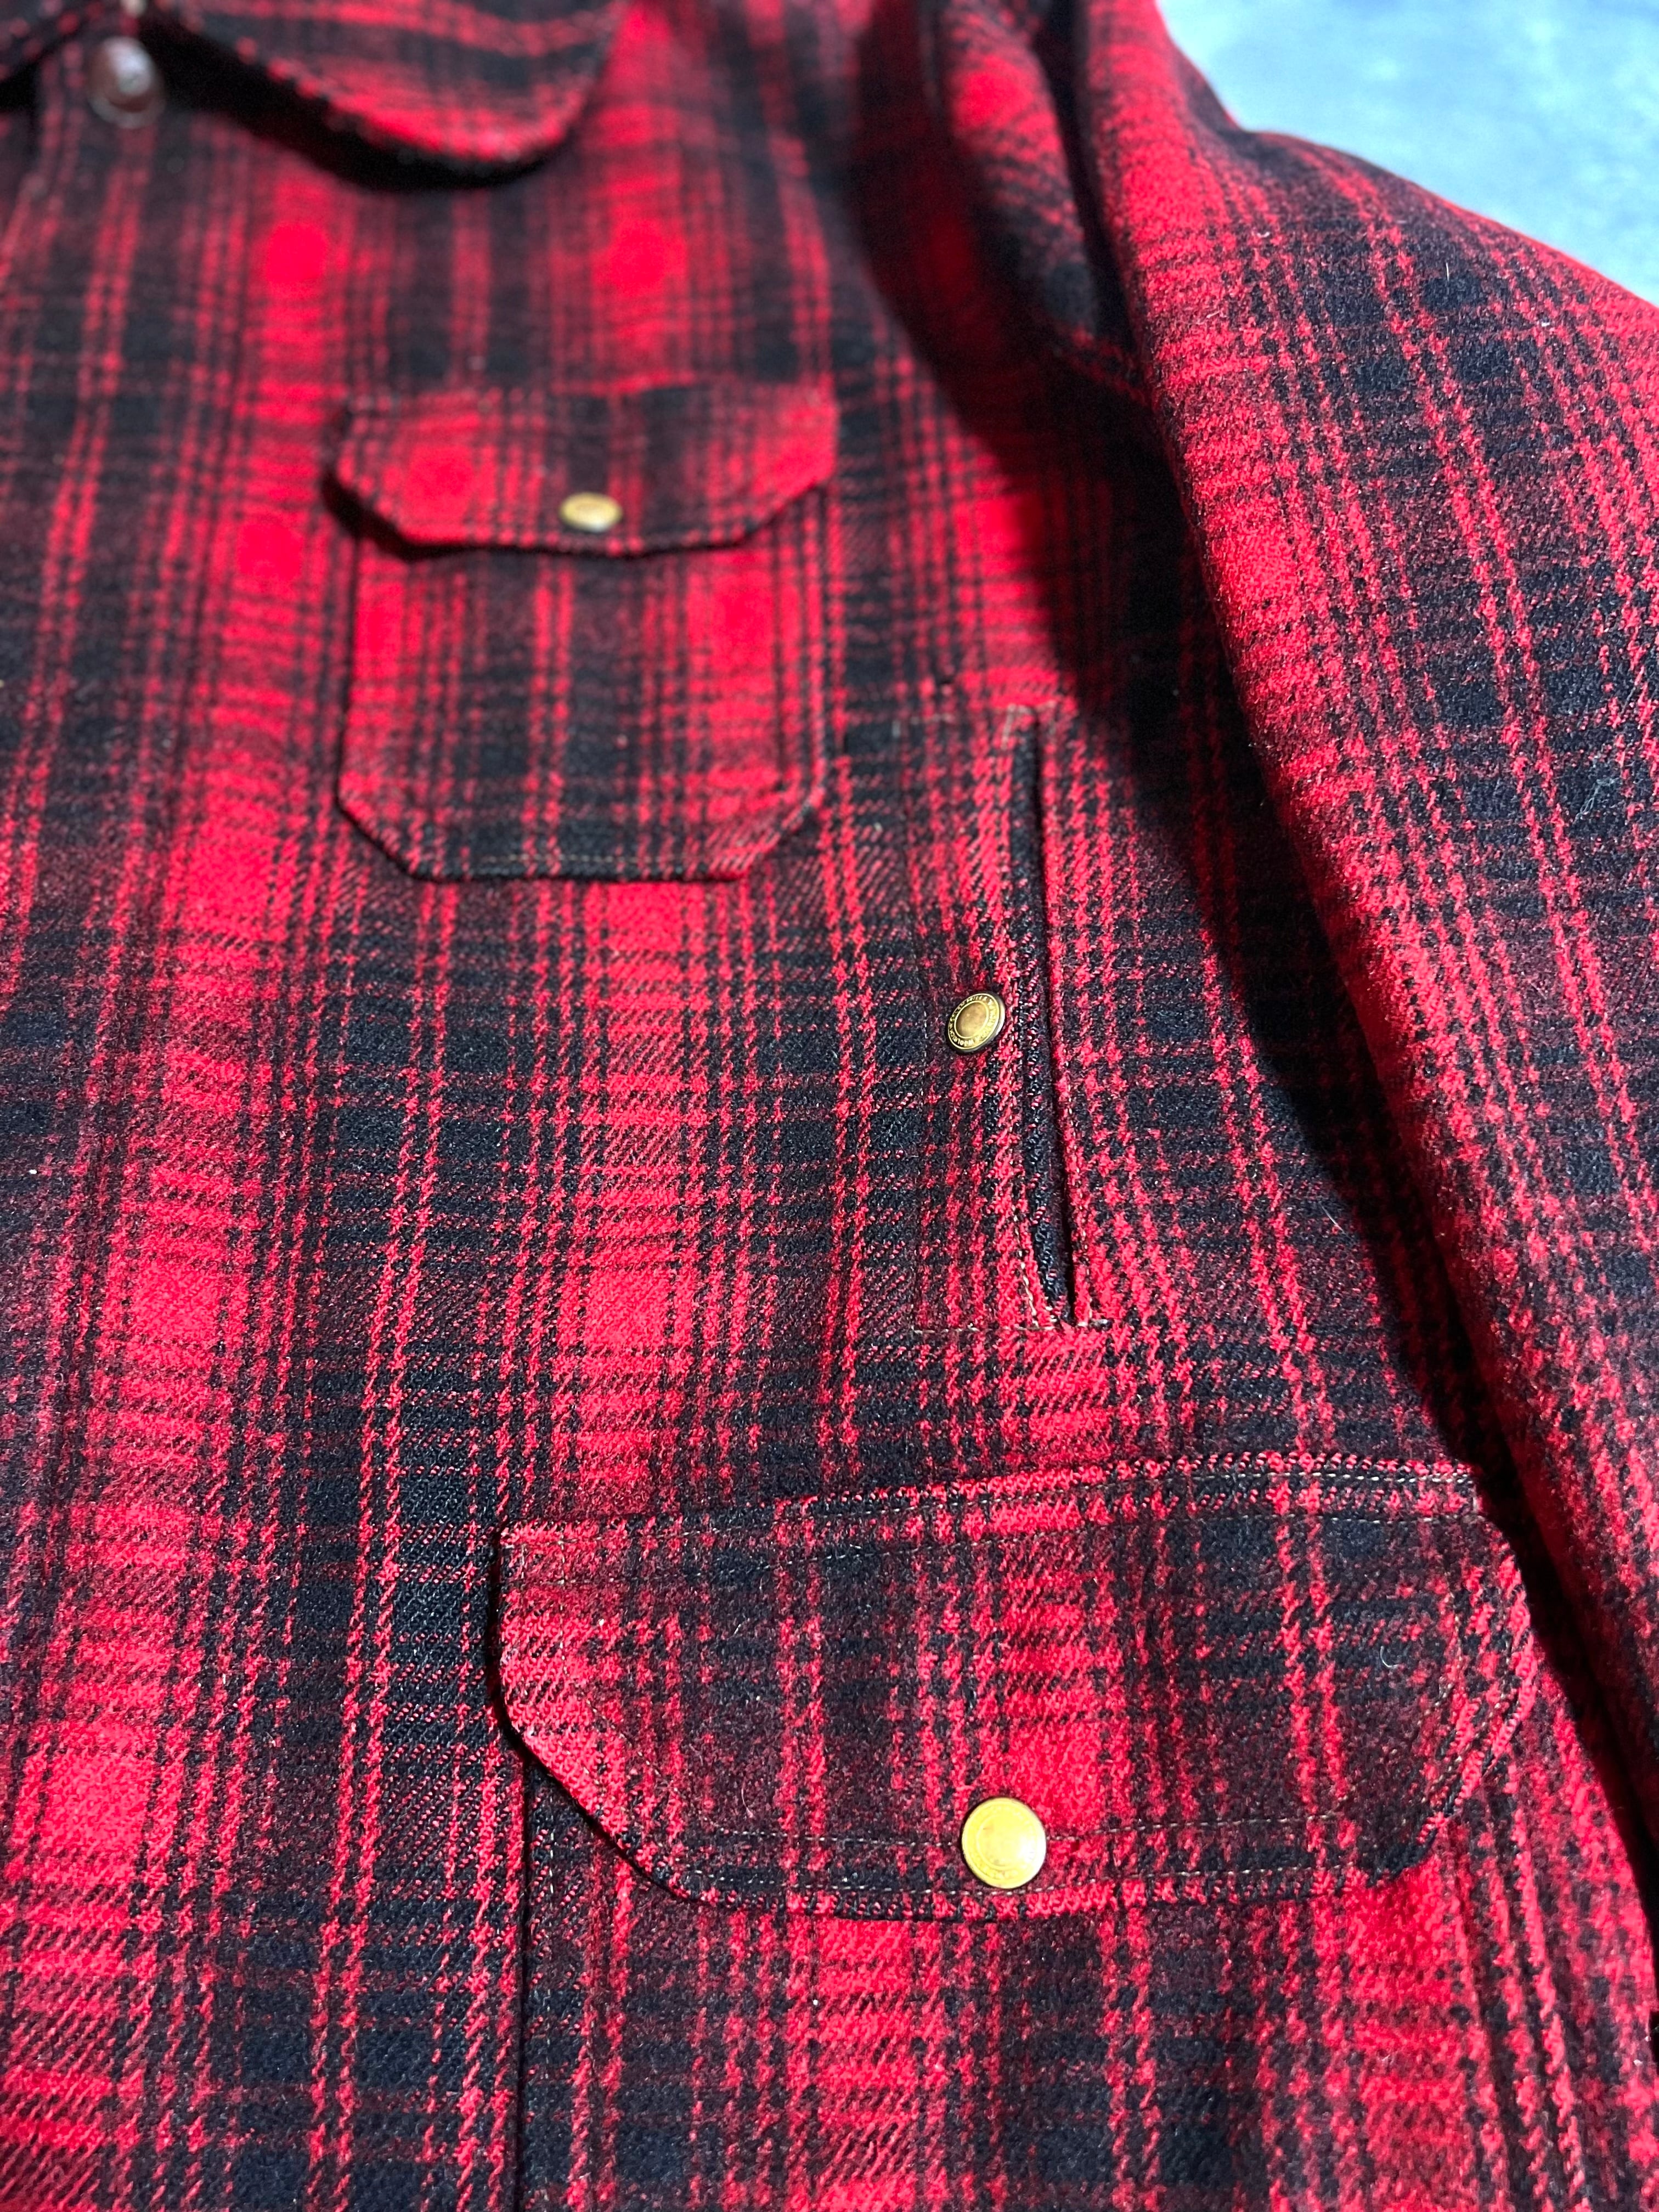 VINTAGE】60s Woolrich Hunting Jacket ウールリッチ ハンティング